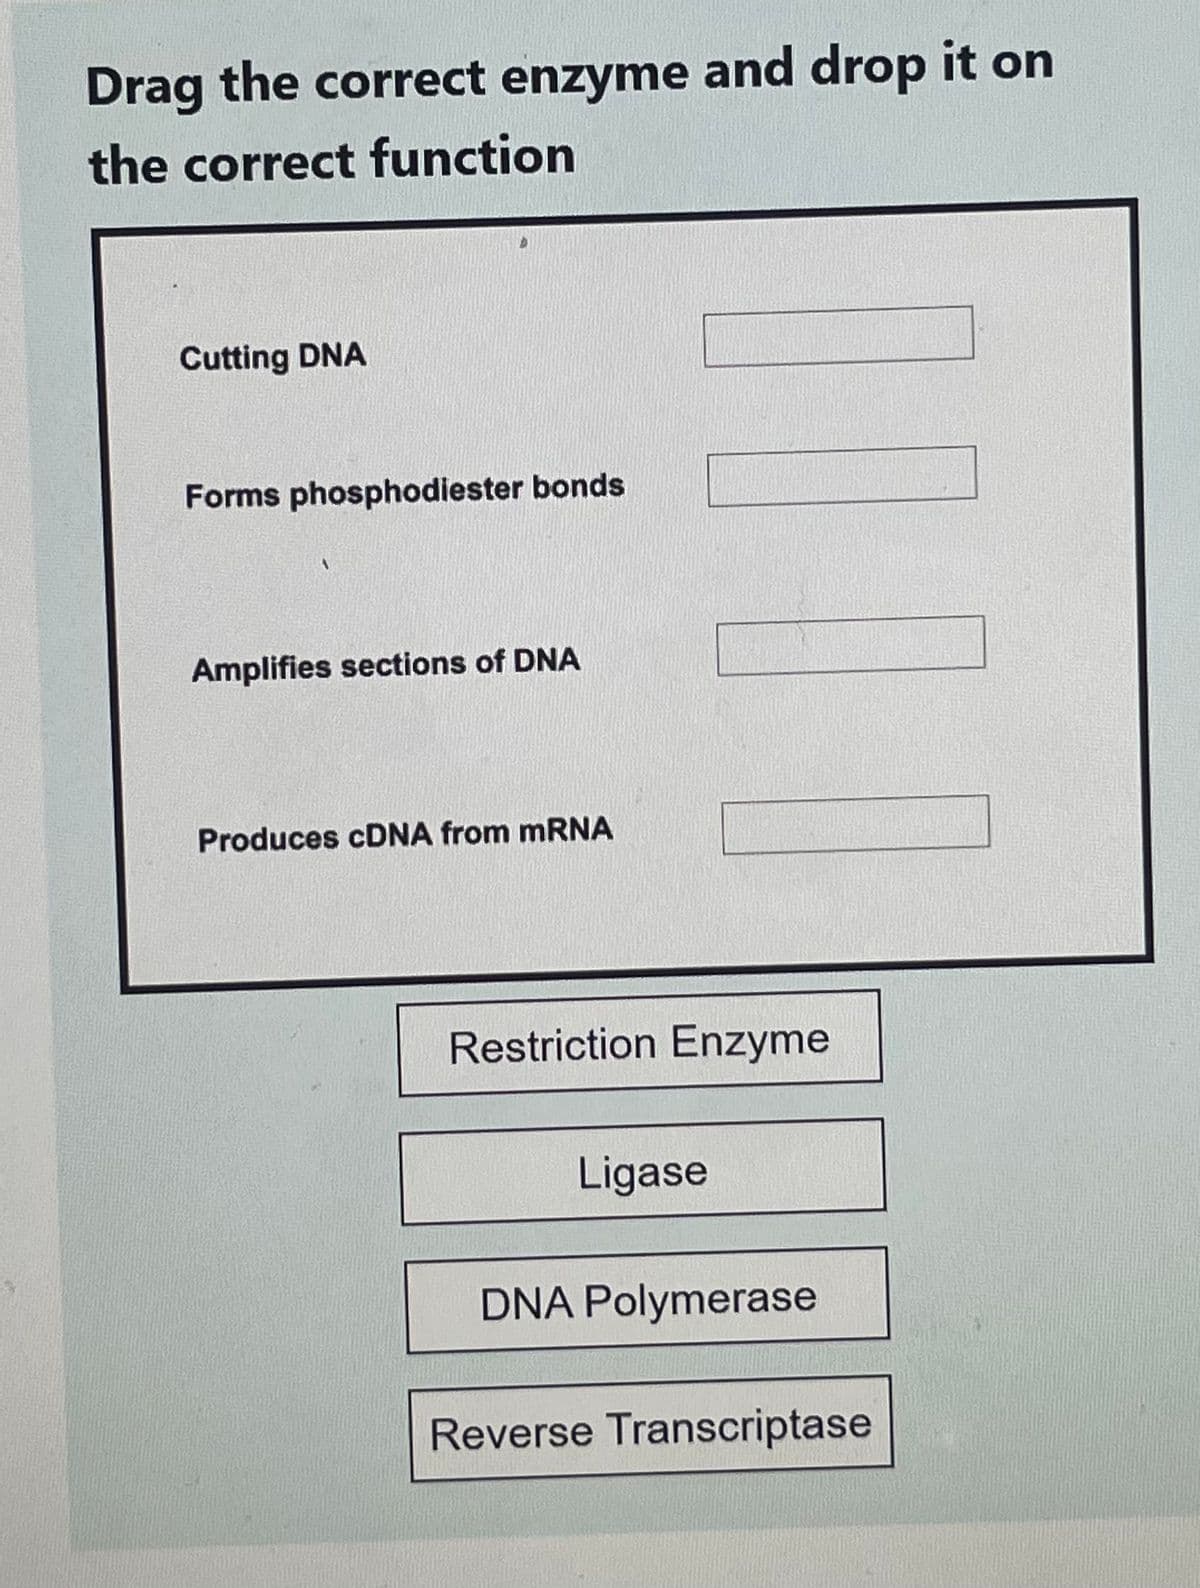 Drag the correct enzyme and drop it on
the correct function
Cutting DNA
Forms phosphodiester bonds
Amplifies sections of DNA
Produces cDNA from mRNA
Restriction Enzyme
Ligase
DNA Polymerase
Reverse Transcriptase